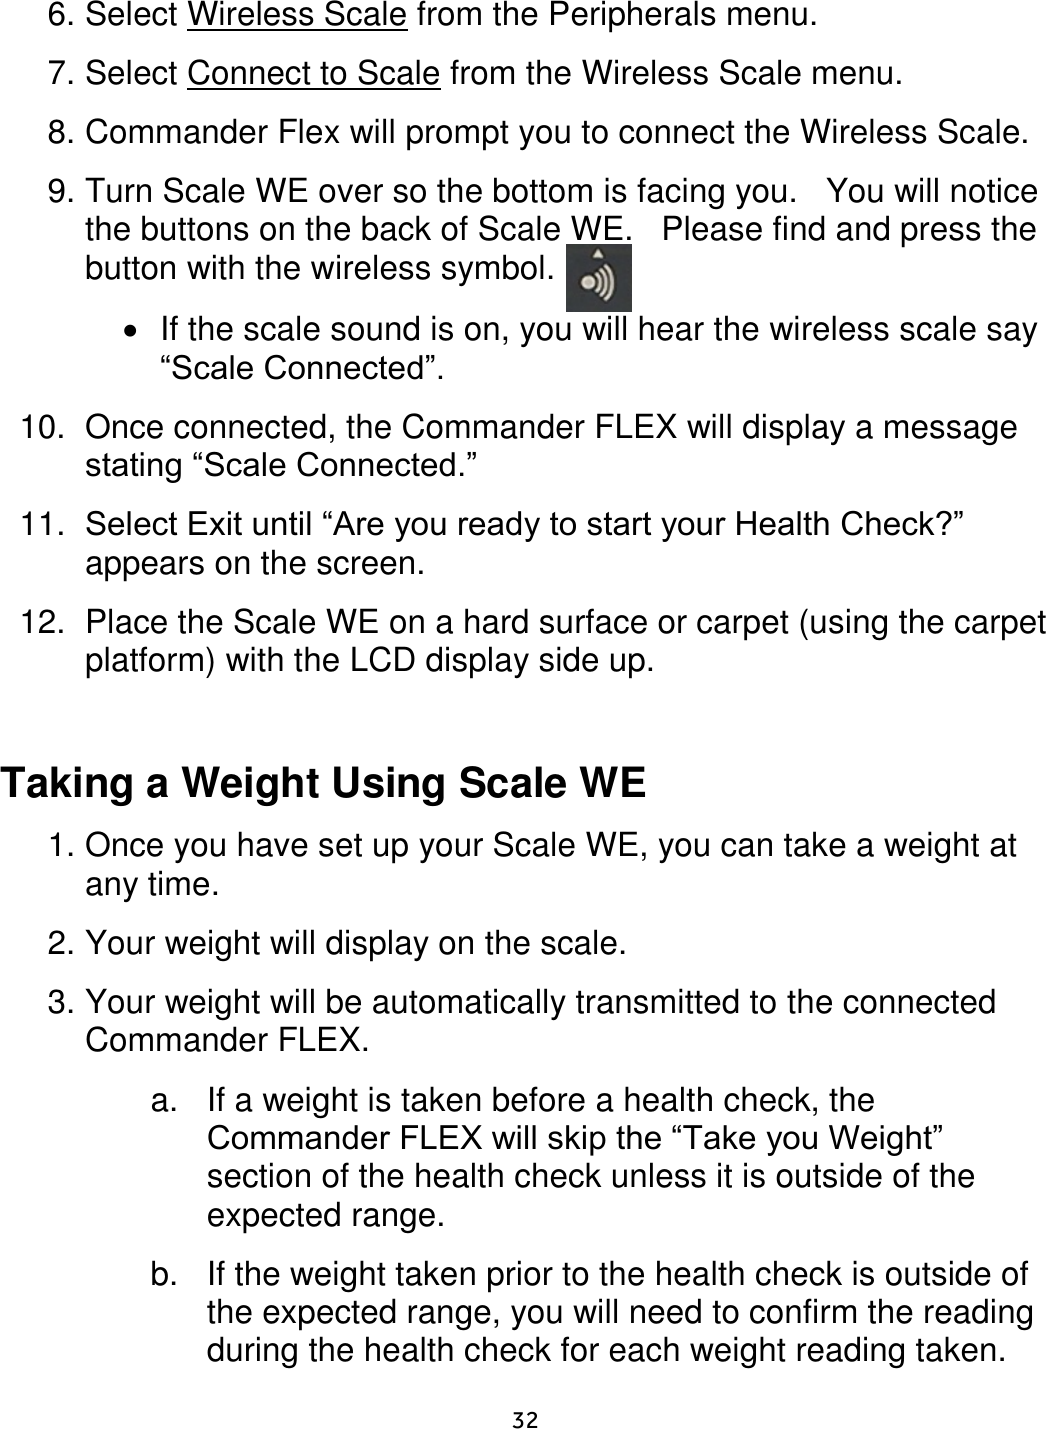     32  6. Select Wireless Scale from the Peripherals menu.  7. Select Connect to Scale from the Wireless Scale menu.  8. Commander Flex will prompt you to connect the Wireless Scale. 9. Turn Scale WE over so the bottom is facing you.   You will notice the buttons on the back of Scale WE.   Please find and press the button with the wireless symbol.  If the scale sound is on, you will hear the wireless scale say “Scale Connected”. 10.  Once connected, the Commander FLEX will display a message stating “Scale Connected.”   11. Select Exit until “Are you ready to start your Health Check?” appears on the screen.   12.  Place the Scale WE on a hard surface or carpet (using the carpet platform) with the LCD display side up.   Taking a Weight Using Scale WE  1. Once you have set up your Scale WE, you can take a weight at any time.  2. Your weight will display on the scale.  3. Your weight will be automatically transmitted to the connected Commander FLEX. a.  If a weight is taken before a health check, the Commander FLEX will skip the “Take you Weight” section of the health check unless it is outside of the expected range.  b.  If the weight taken prior to the health check is outside of the expected range, you will need to confirm the reading during the health check for each weight reading taken.  